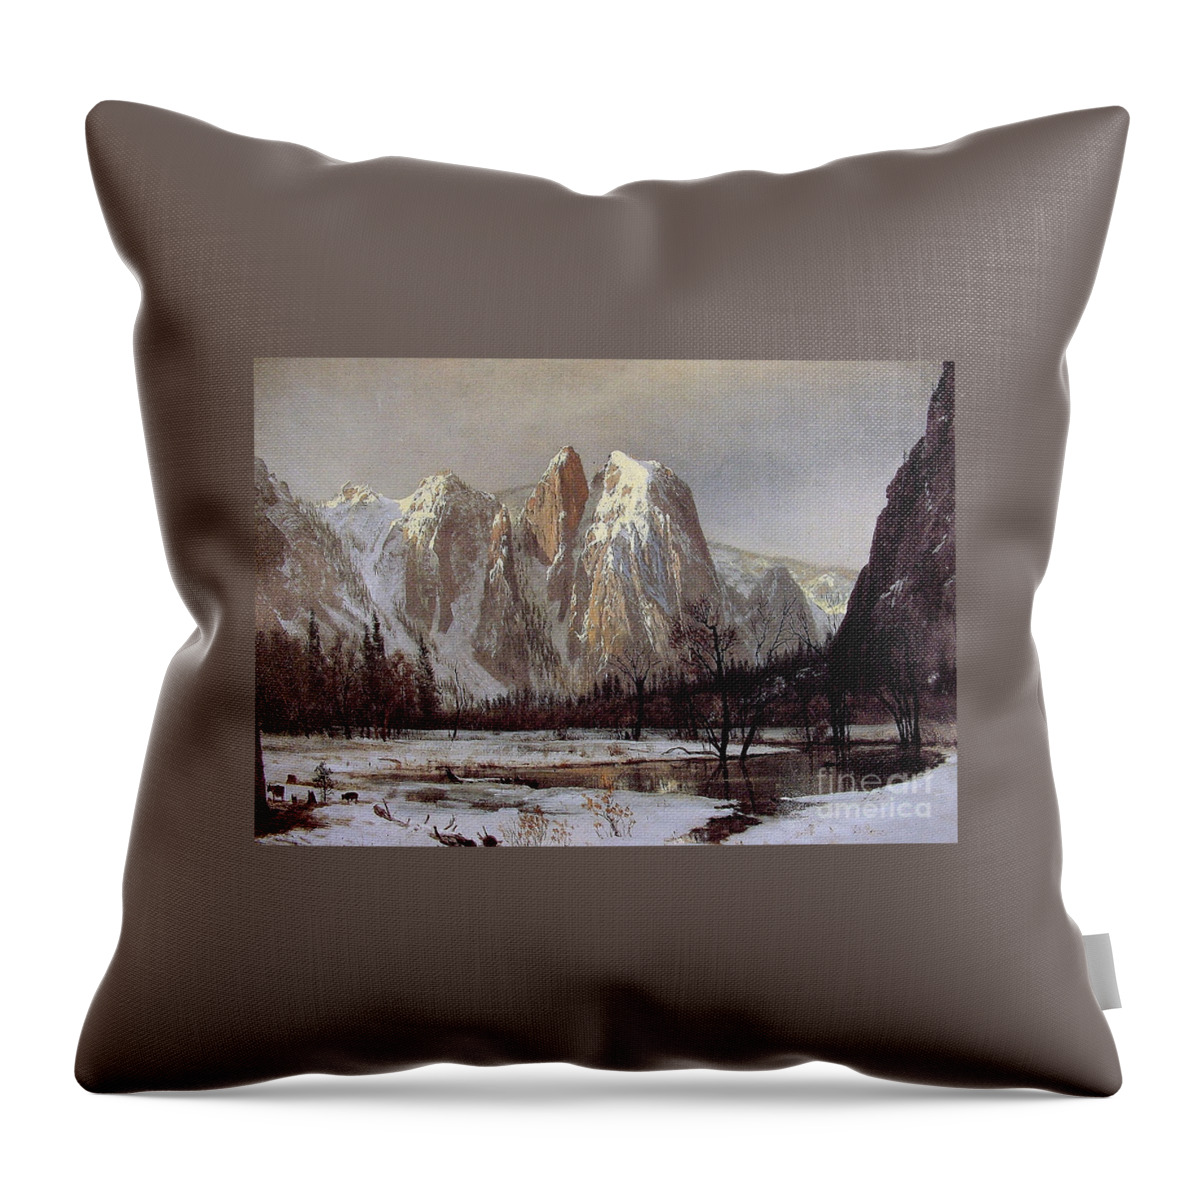 Cathedral Rock Throw Pillow featuring the painting Cathedral Rock by MotionAge Designs